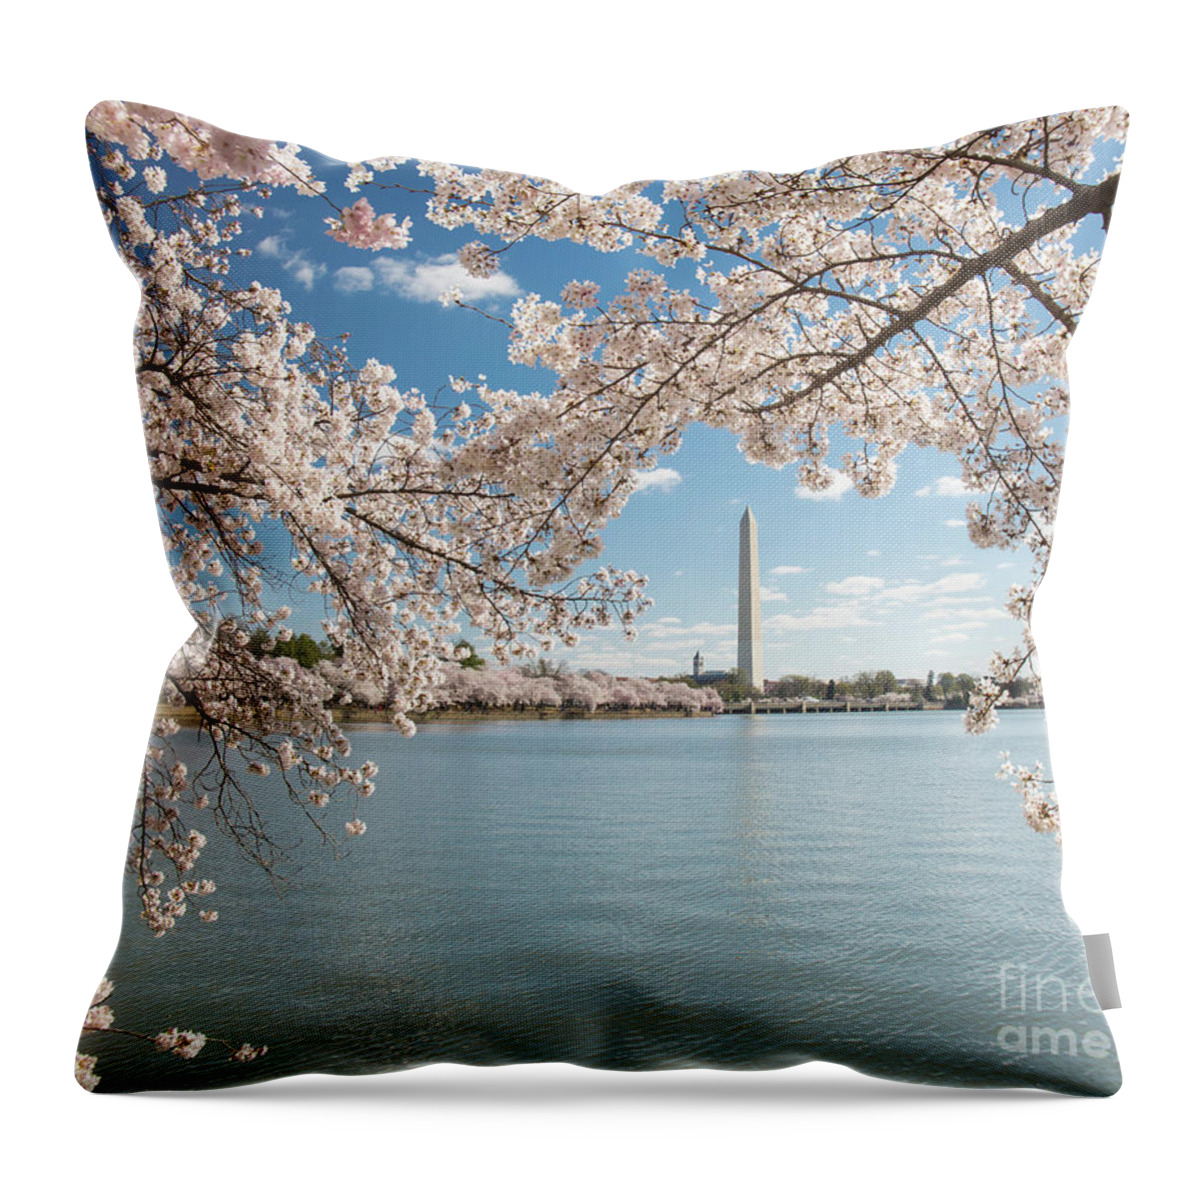 Cherry Blossom Festival Throw Pillow featuring the photograph Framed by cherry blossoms by Agnes Caruso